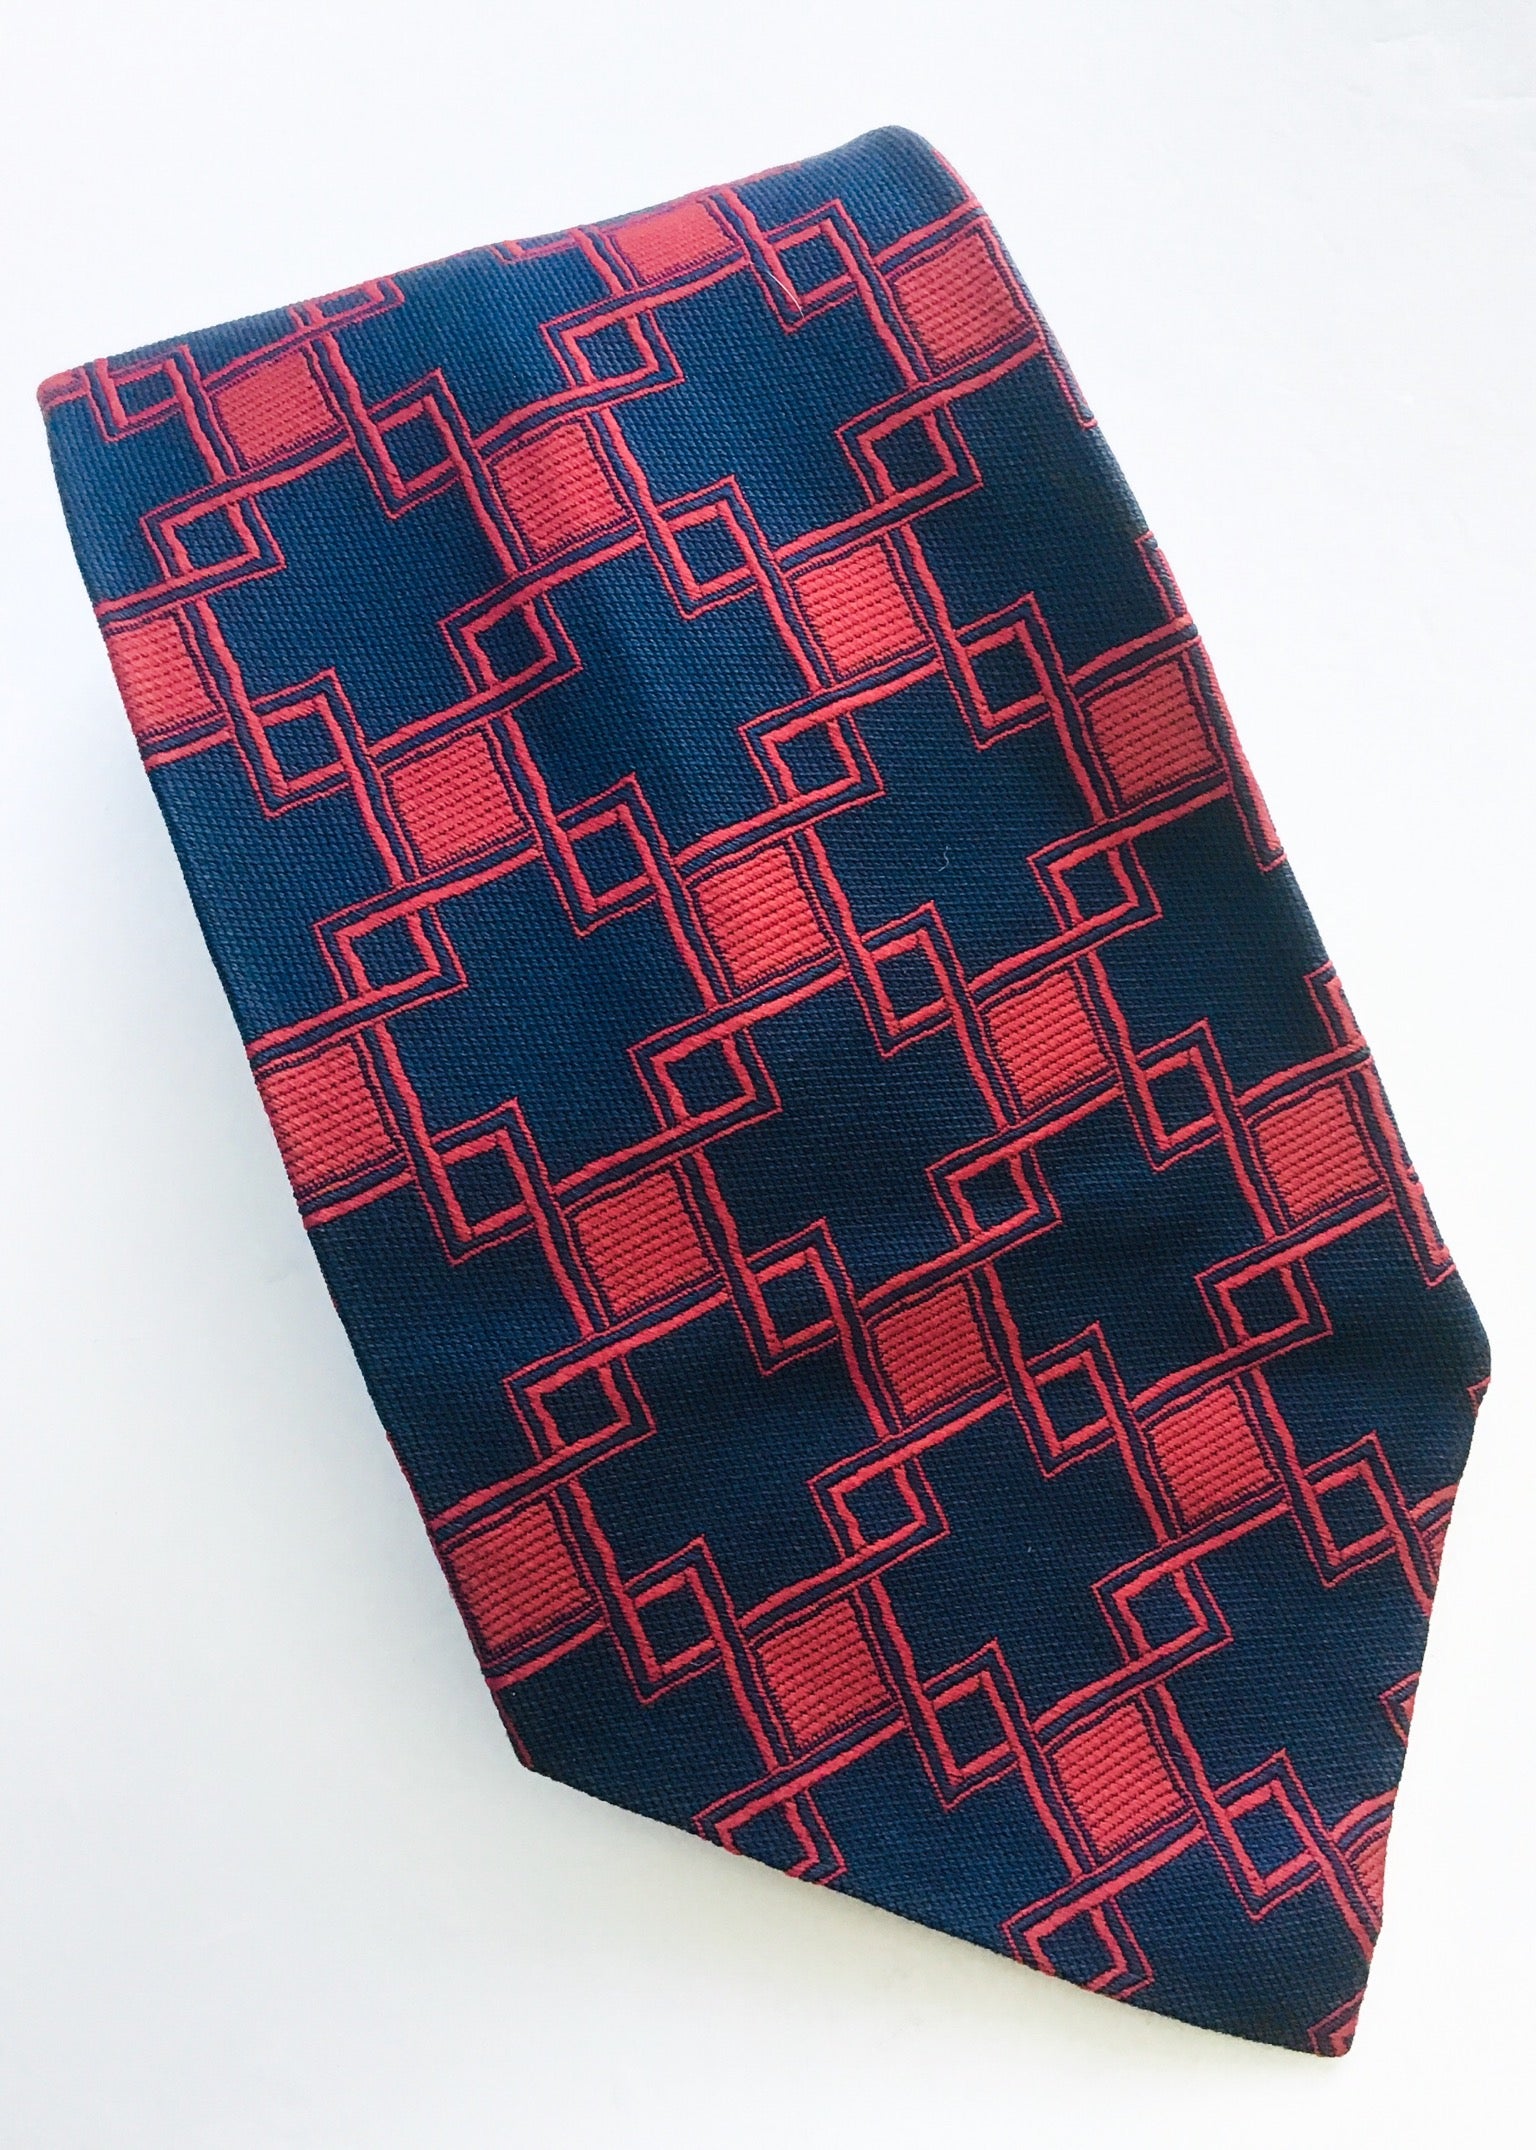 Vintage 70s kipper tie in red and blue cross pattern by don loper